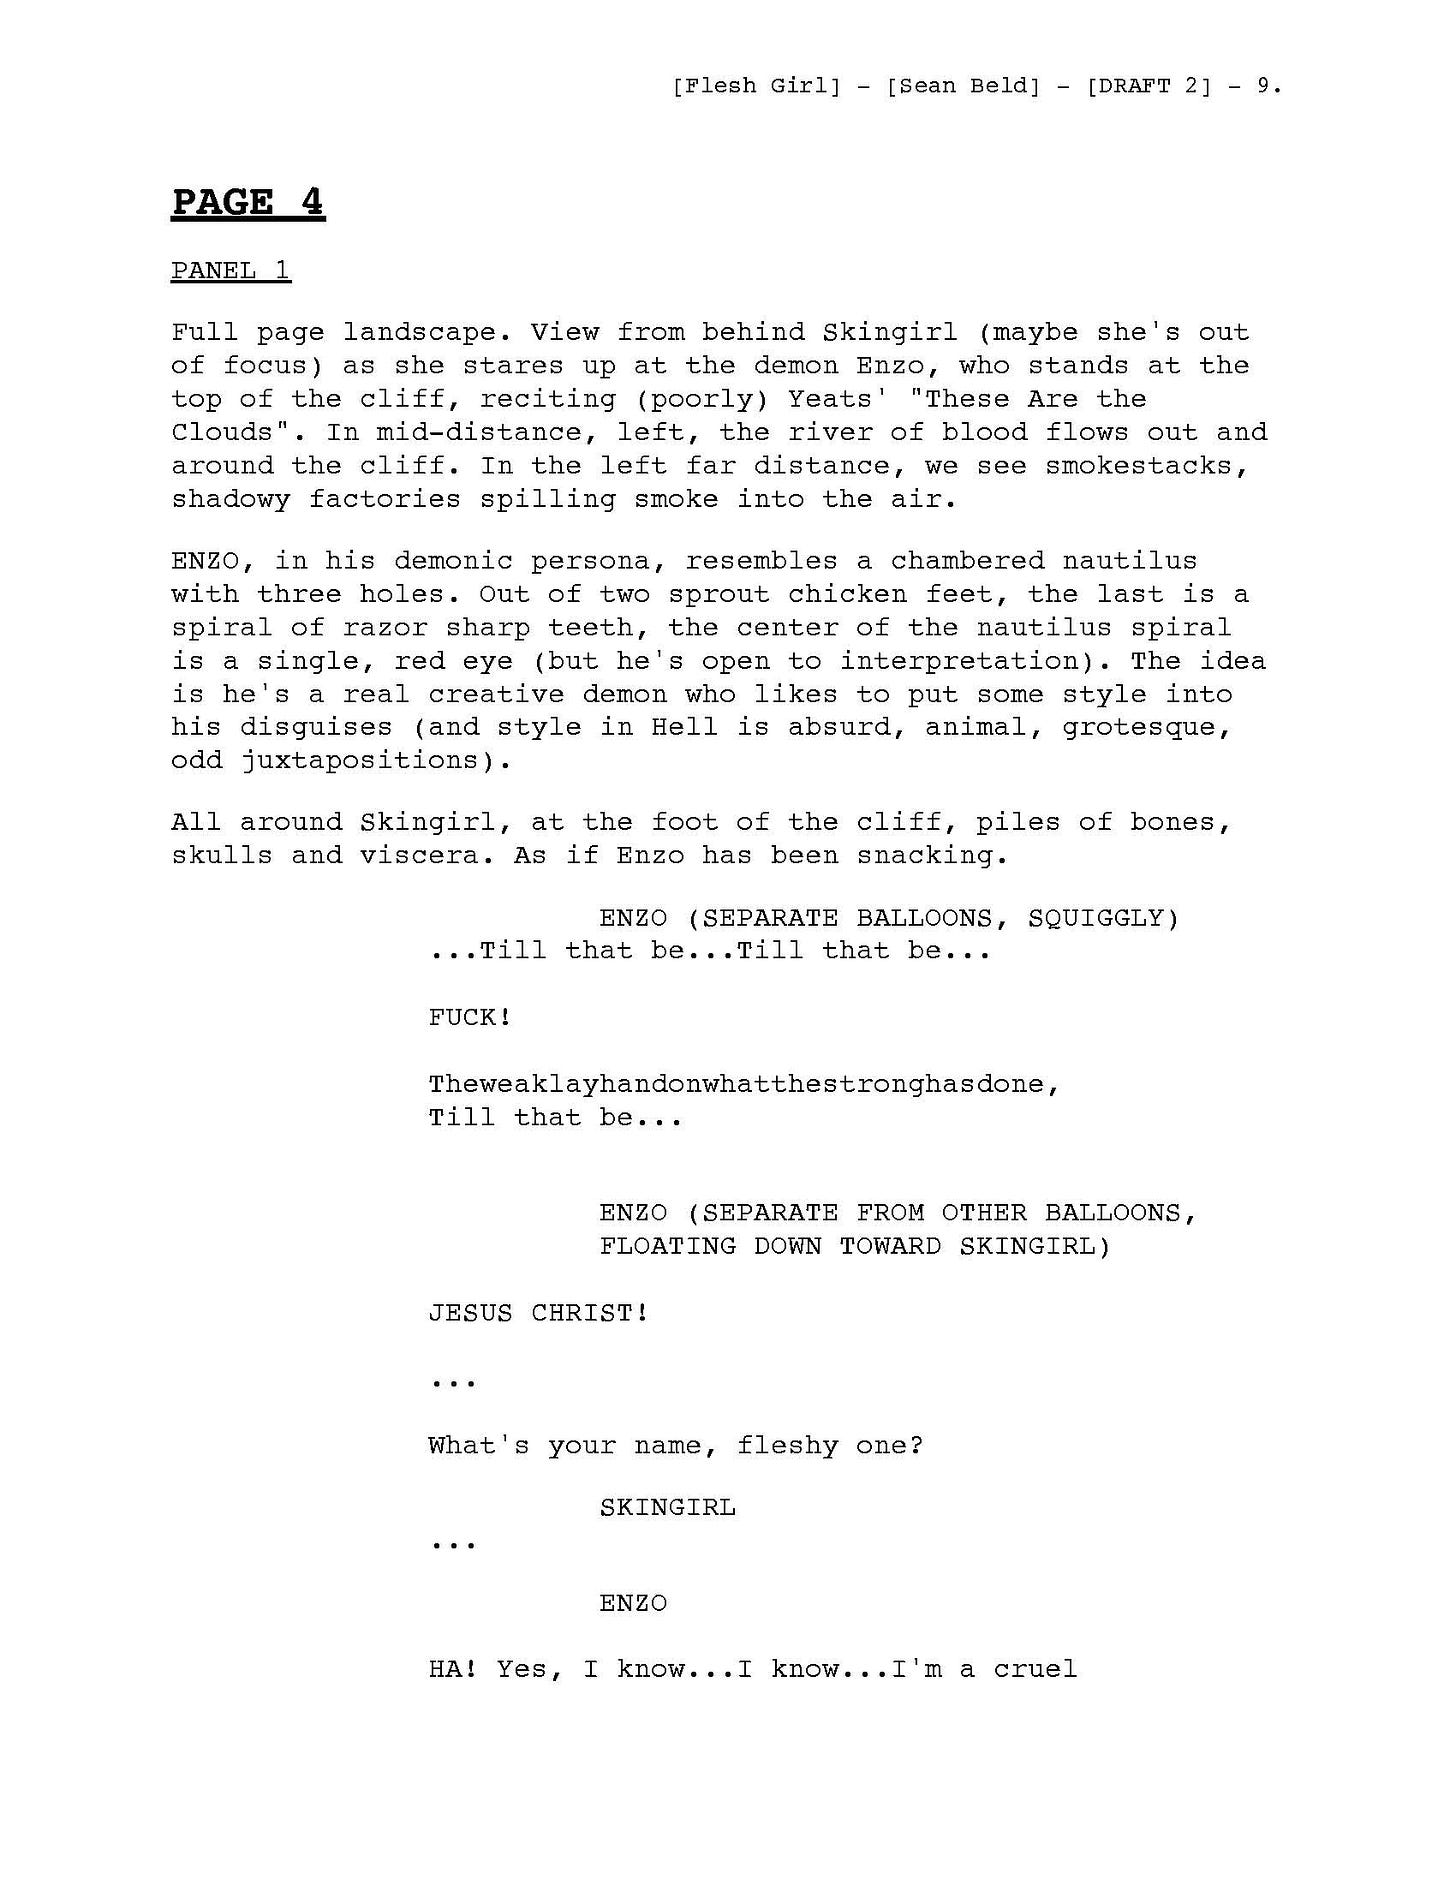 The script for page 4. Page 1. See PDF.